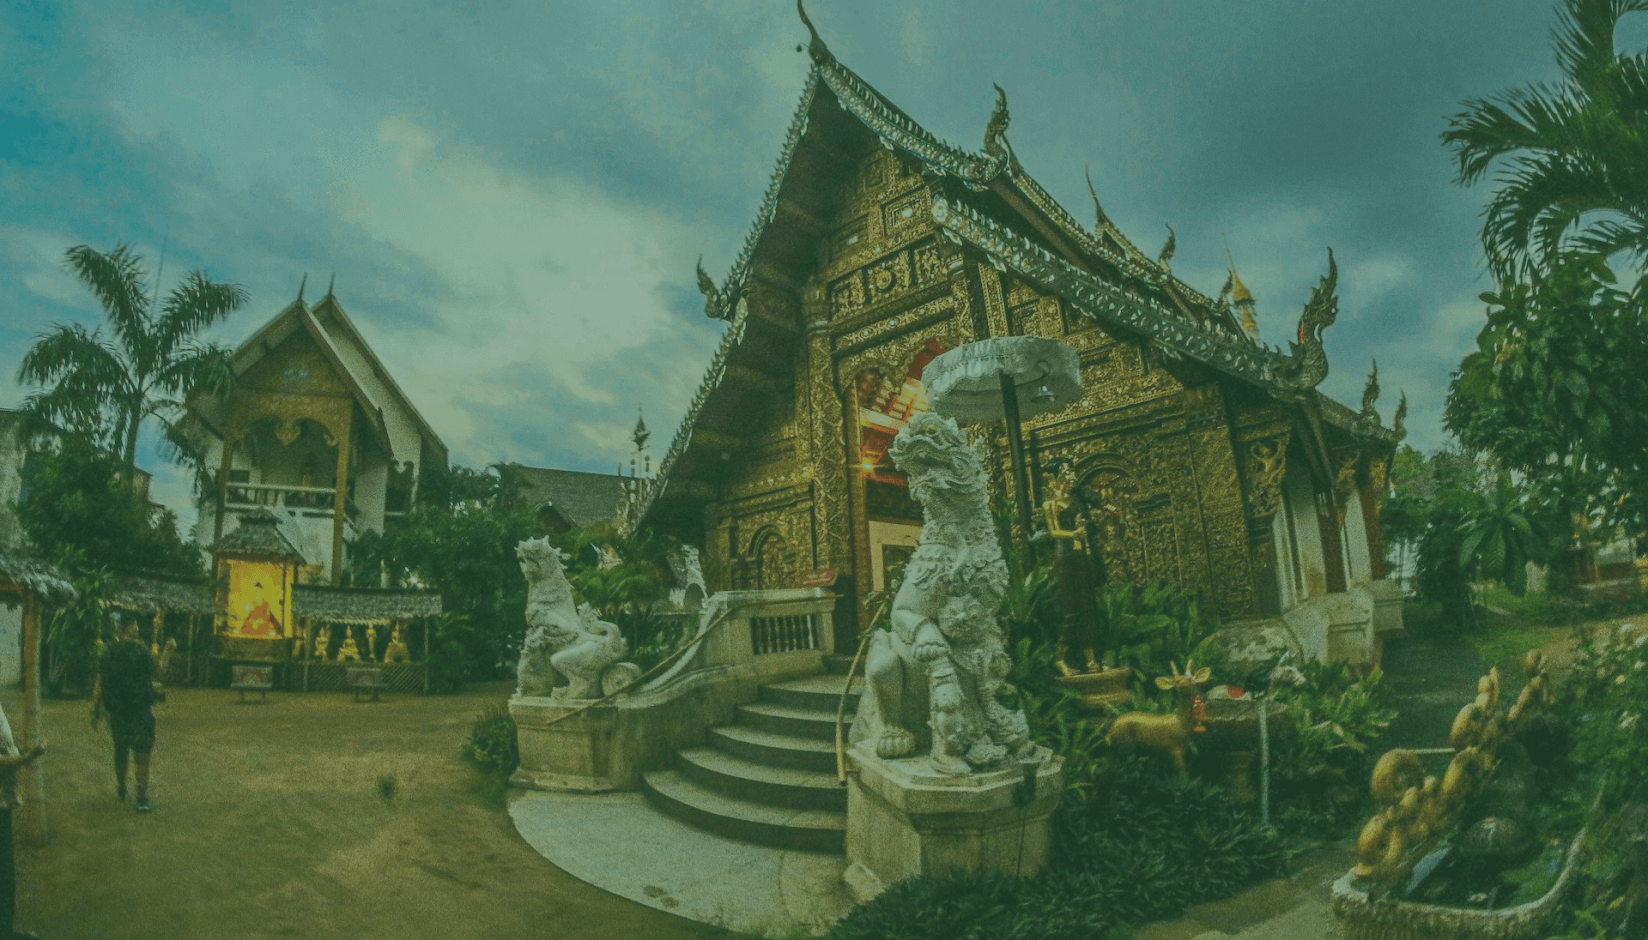 Chiang Mai, Thailand - top destination for coworking space